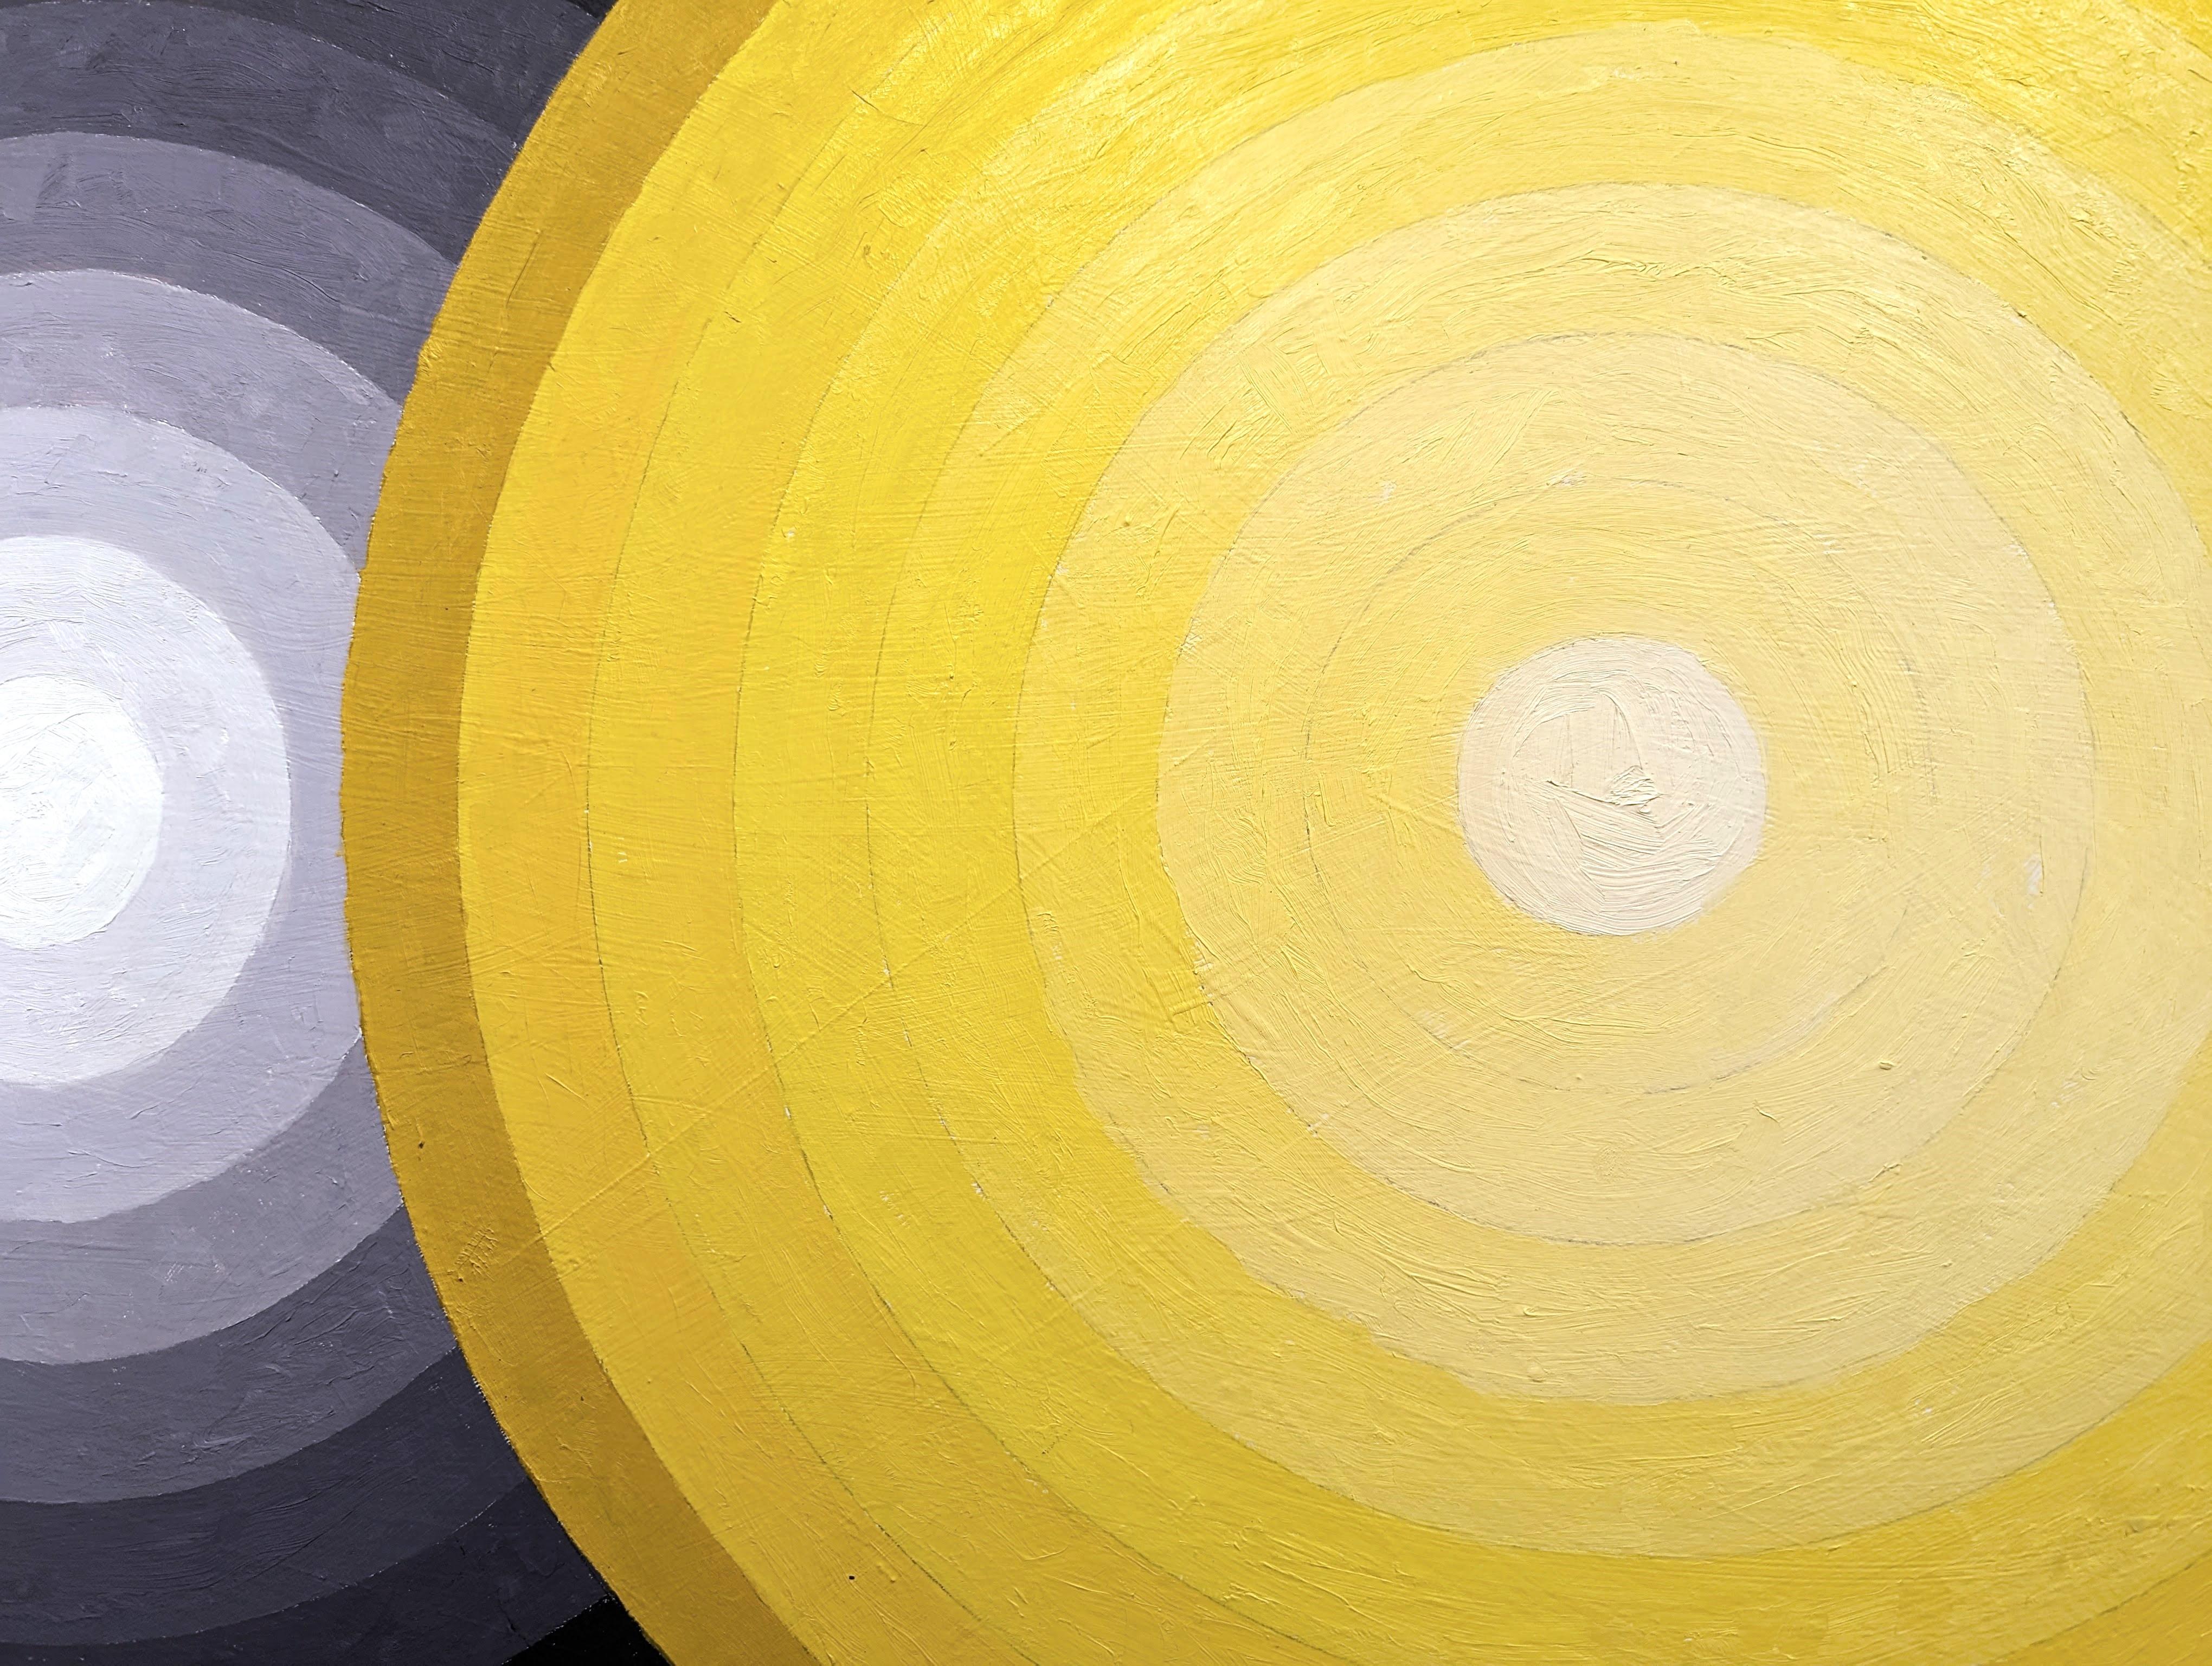 Gray and yellow abstract contemporary concentric circle painting by Houston, TX artist David Hardaker. Signed, titled, and dated by the artist on the reverse.

Artist Statement: The work is a response to music.

The application of texture and the